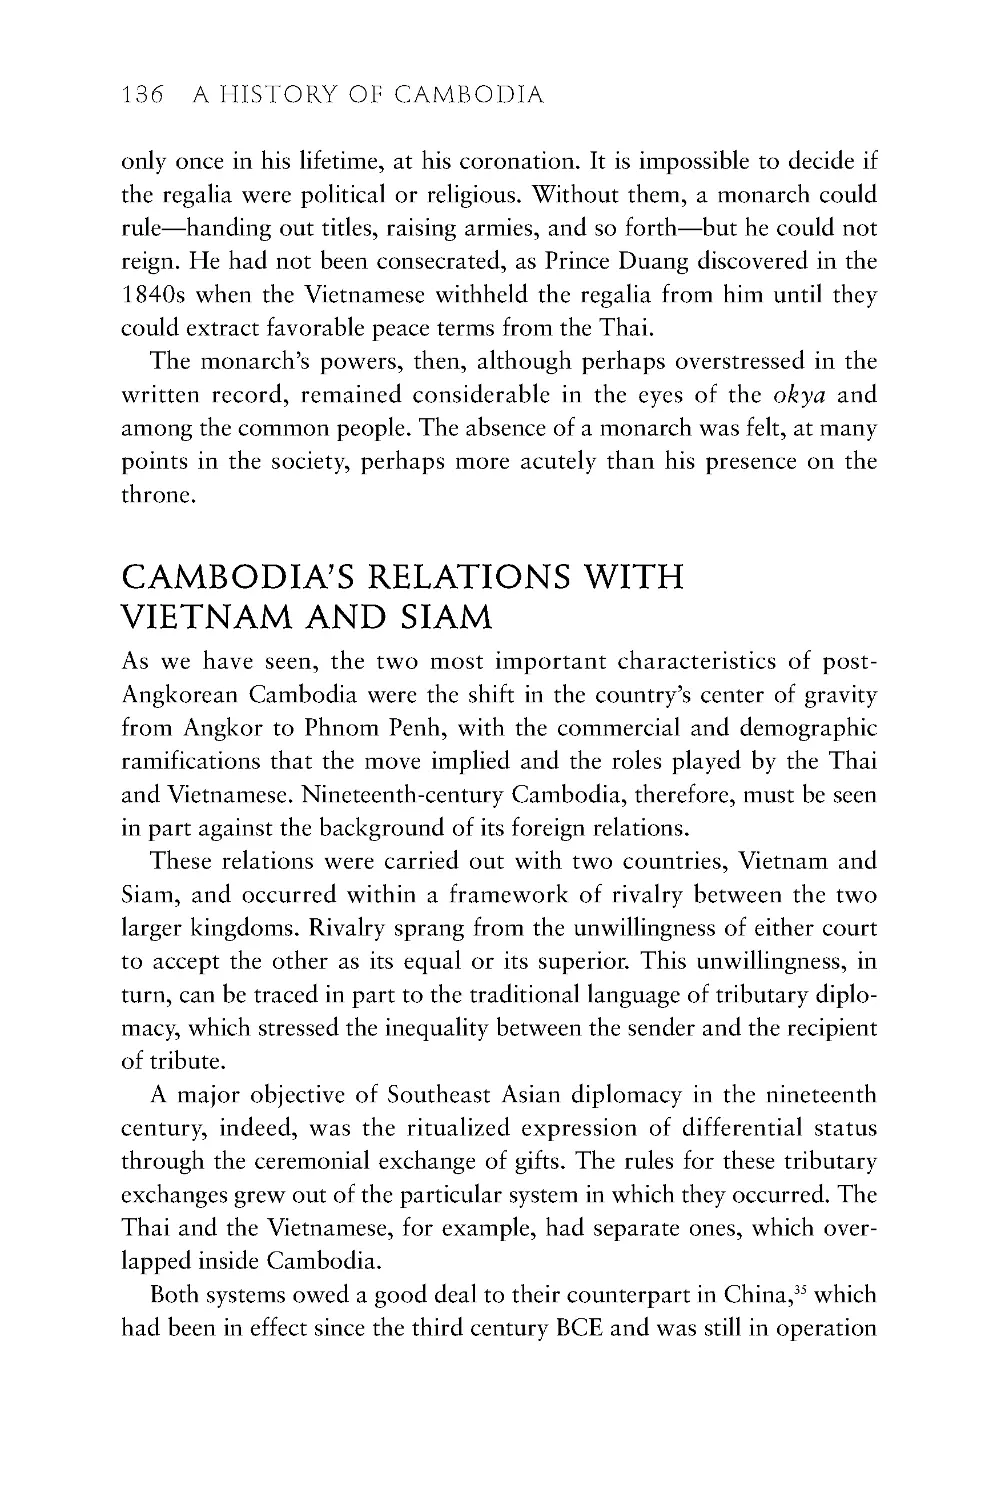 Cambodia's Relations with Vietnam and Siam